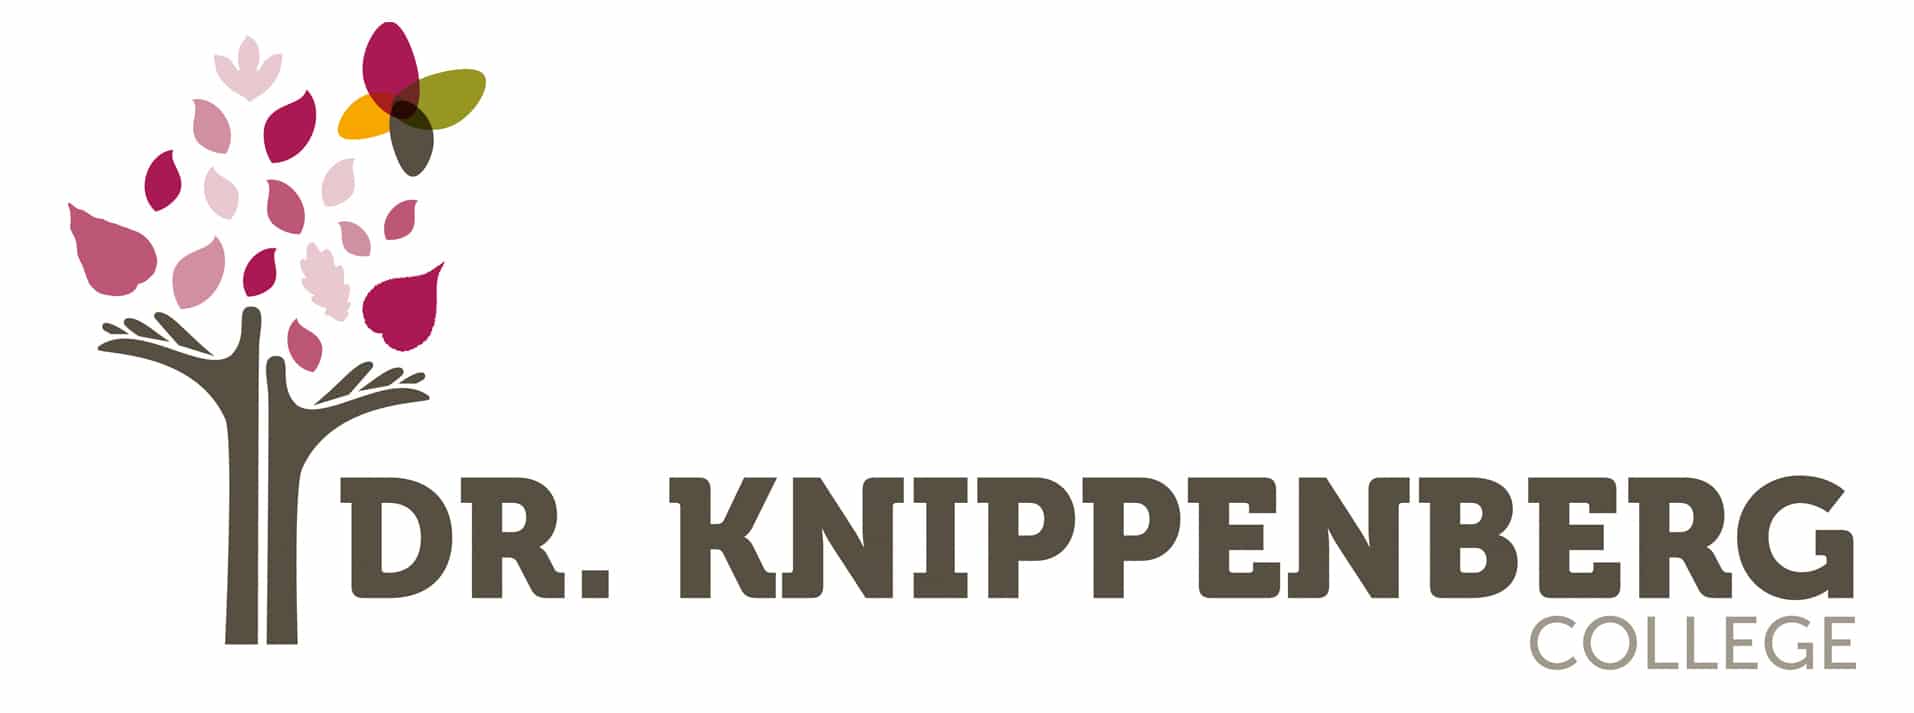 Dr. Knippenbergcollege